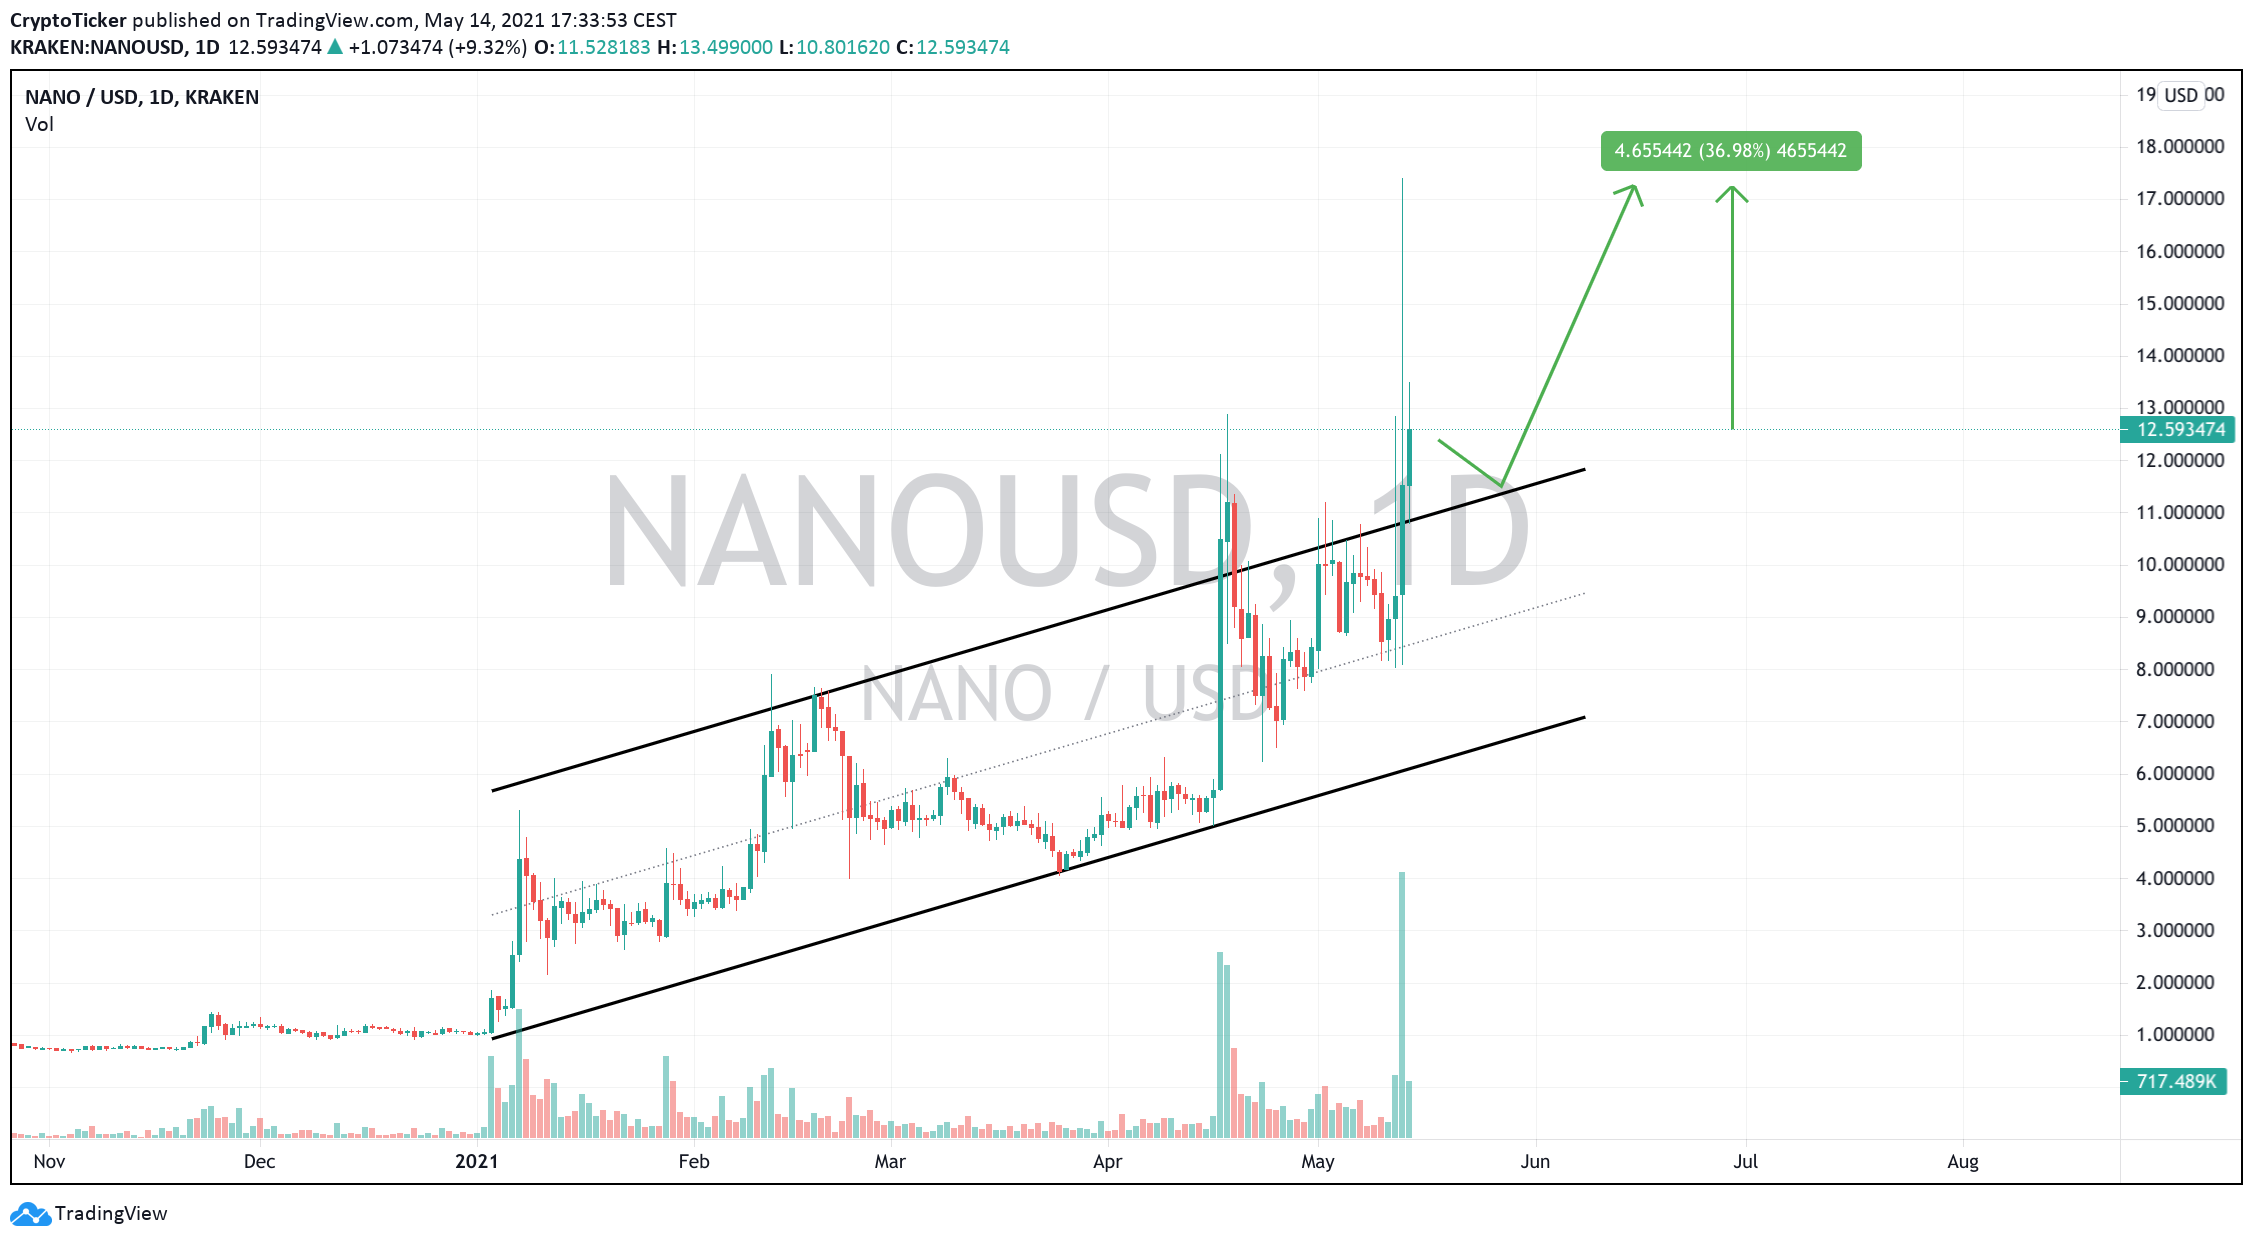 NANO/USD 1-Day chart showing a strong uptrend